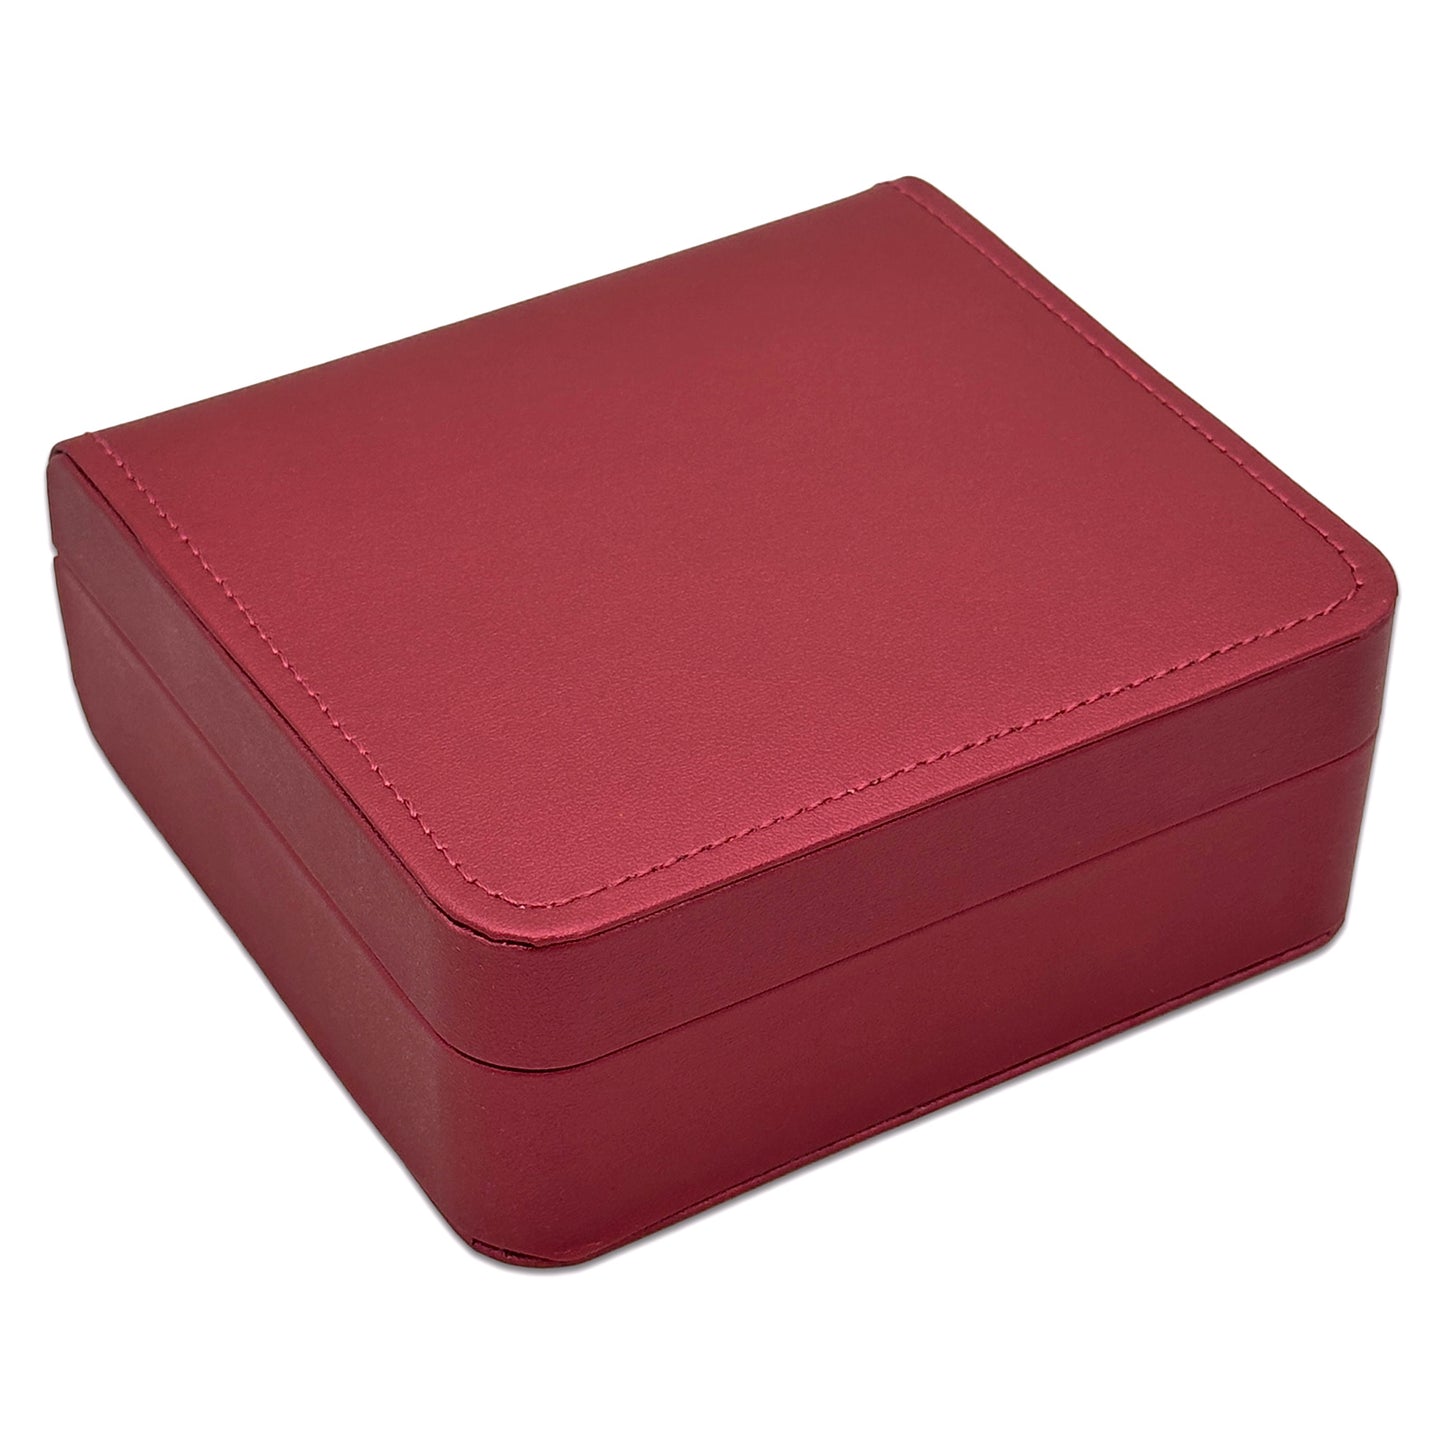 5 1/2" x 5" Red Leatherette Combination Jewelry Display Box